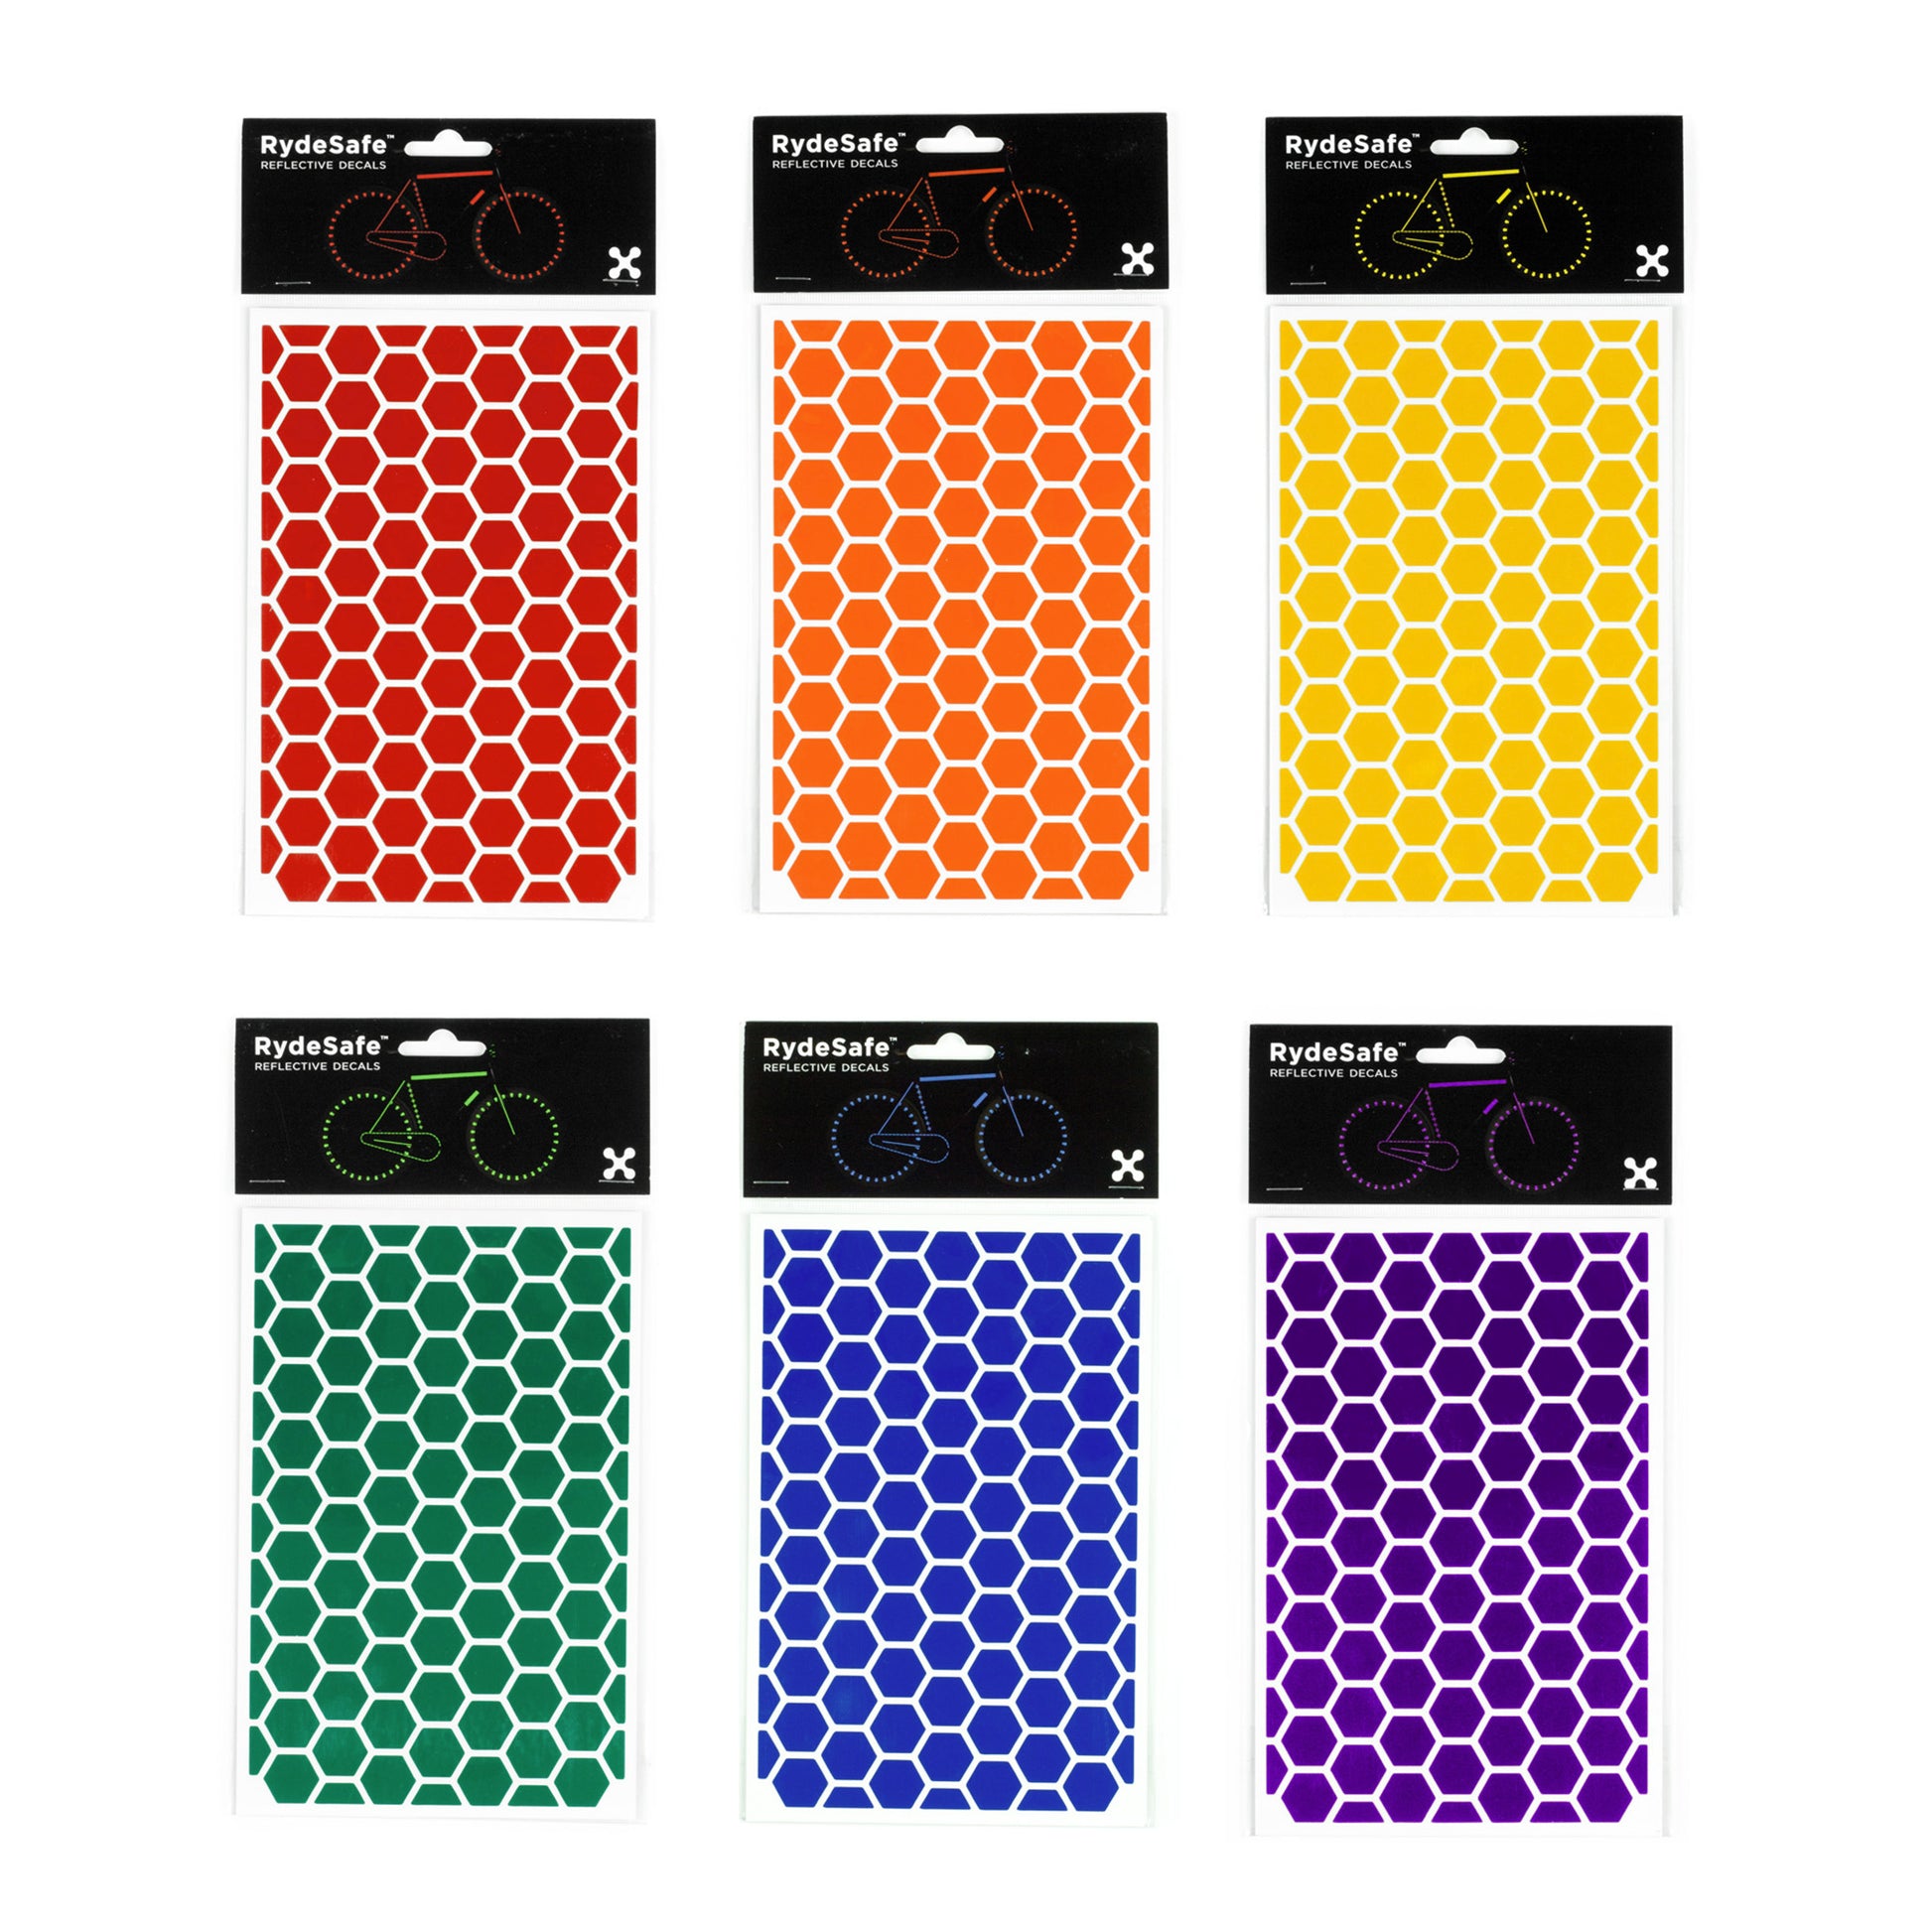 6 PACK of Large Hexagon Kits - RydeSafe Reflective Stickers